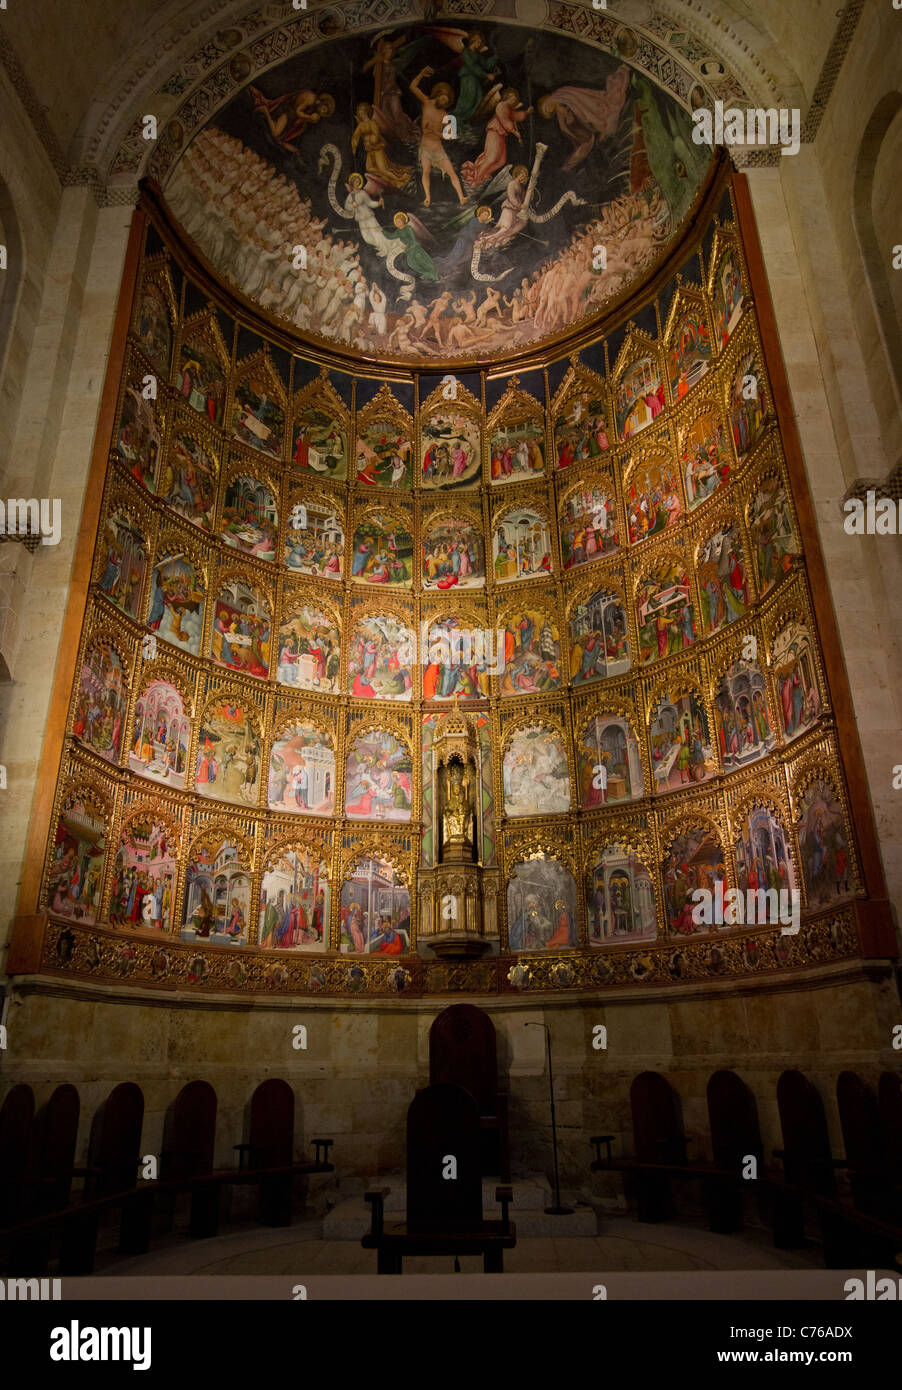 Altarpiece and Final Judgment scene above it in Old Cathedral of Salamanca. Spain. Stock Photo